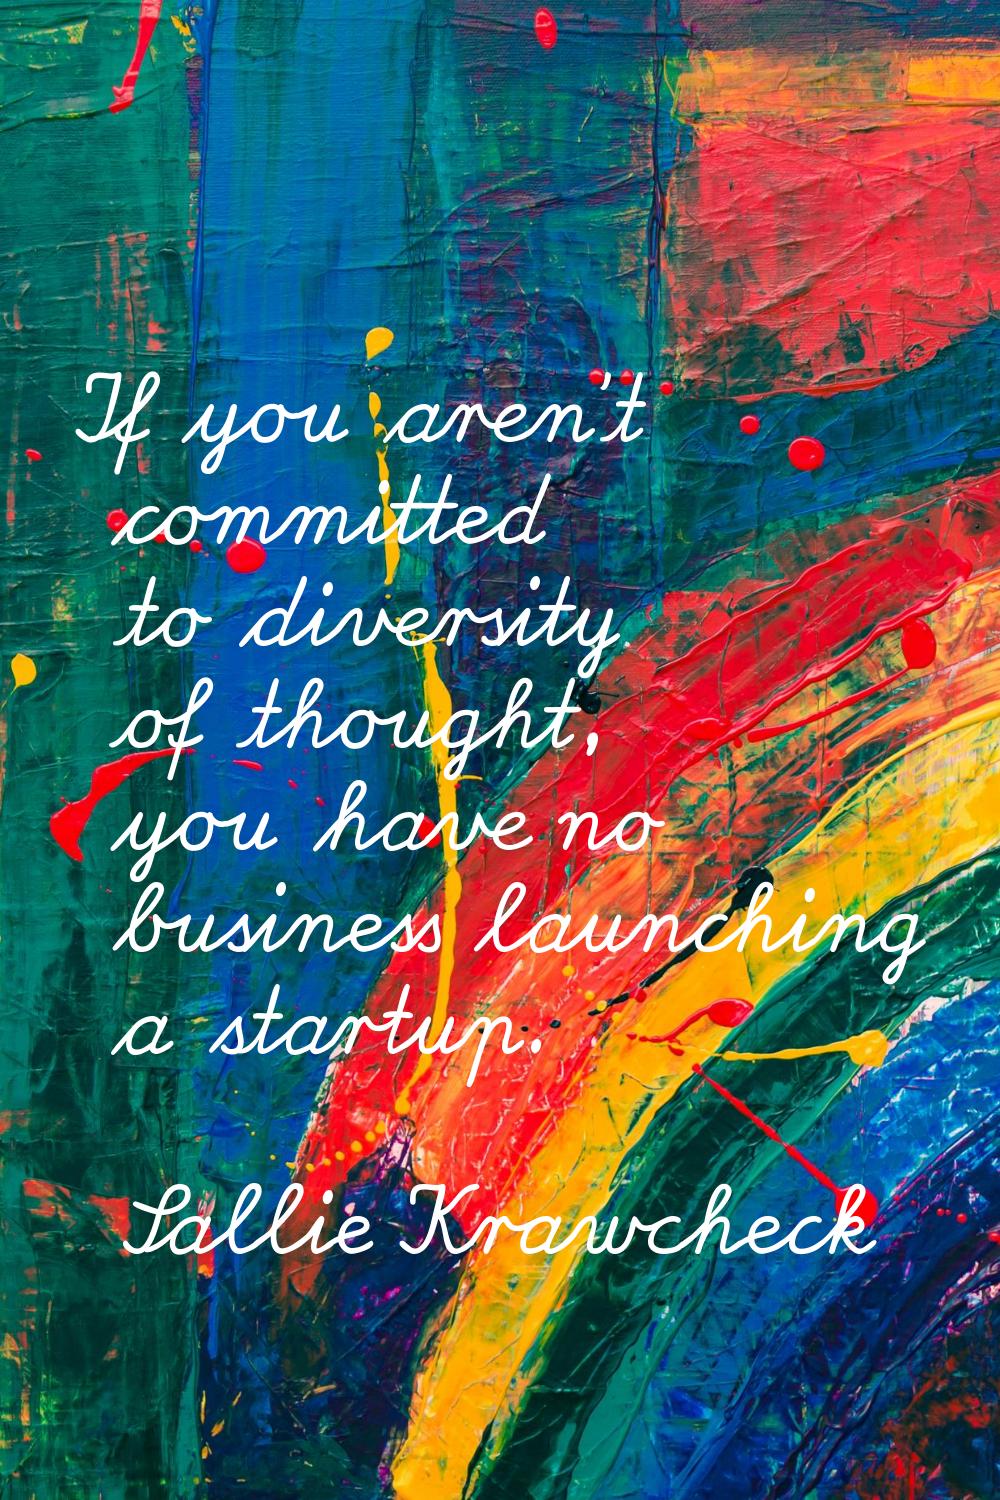 If you aren't committed to diversity of thought, you have no business launching a startup.